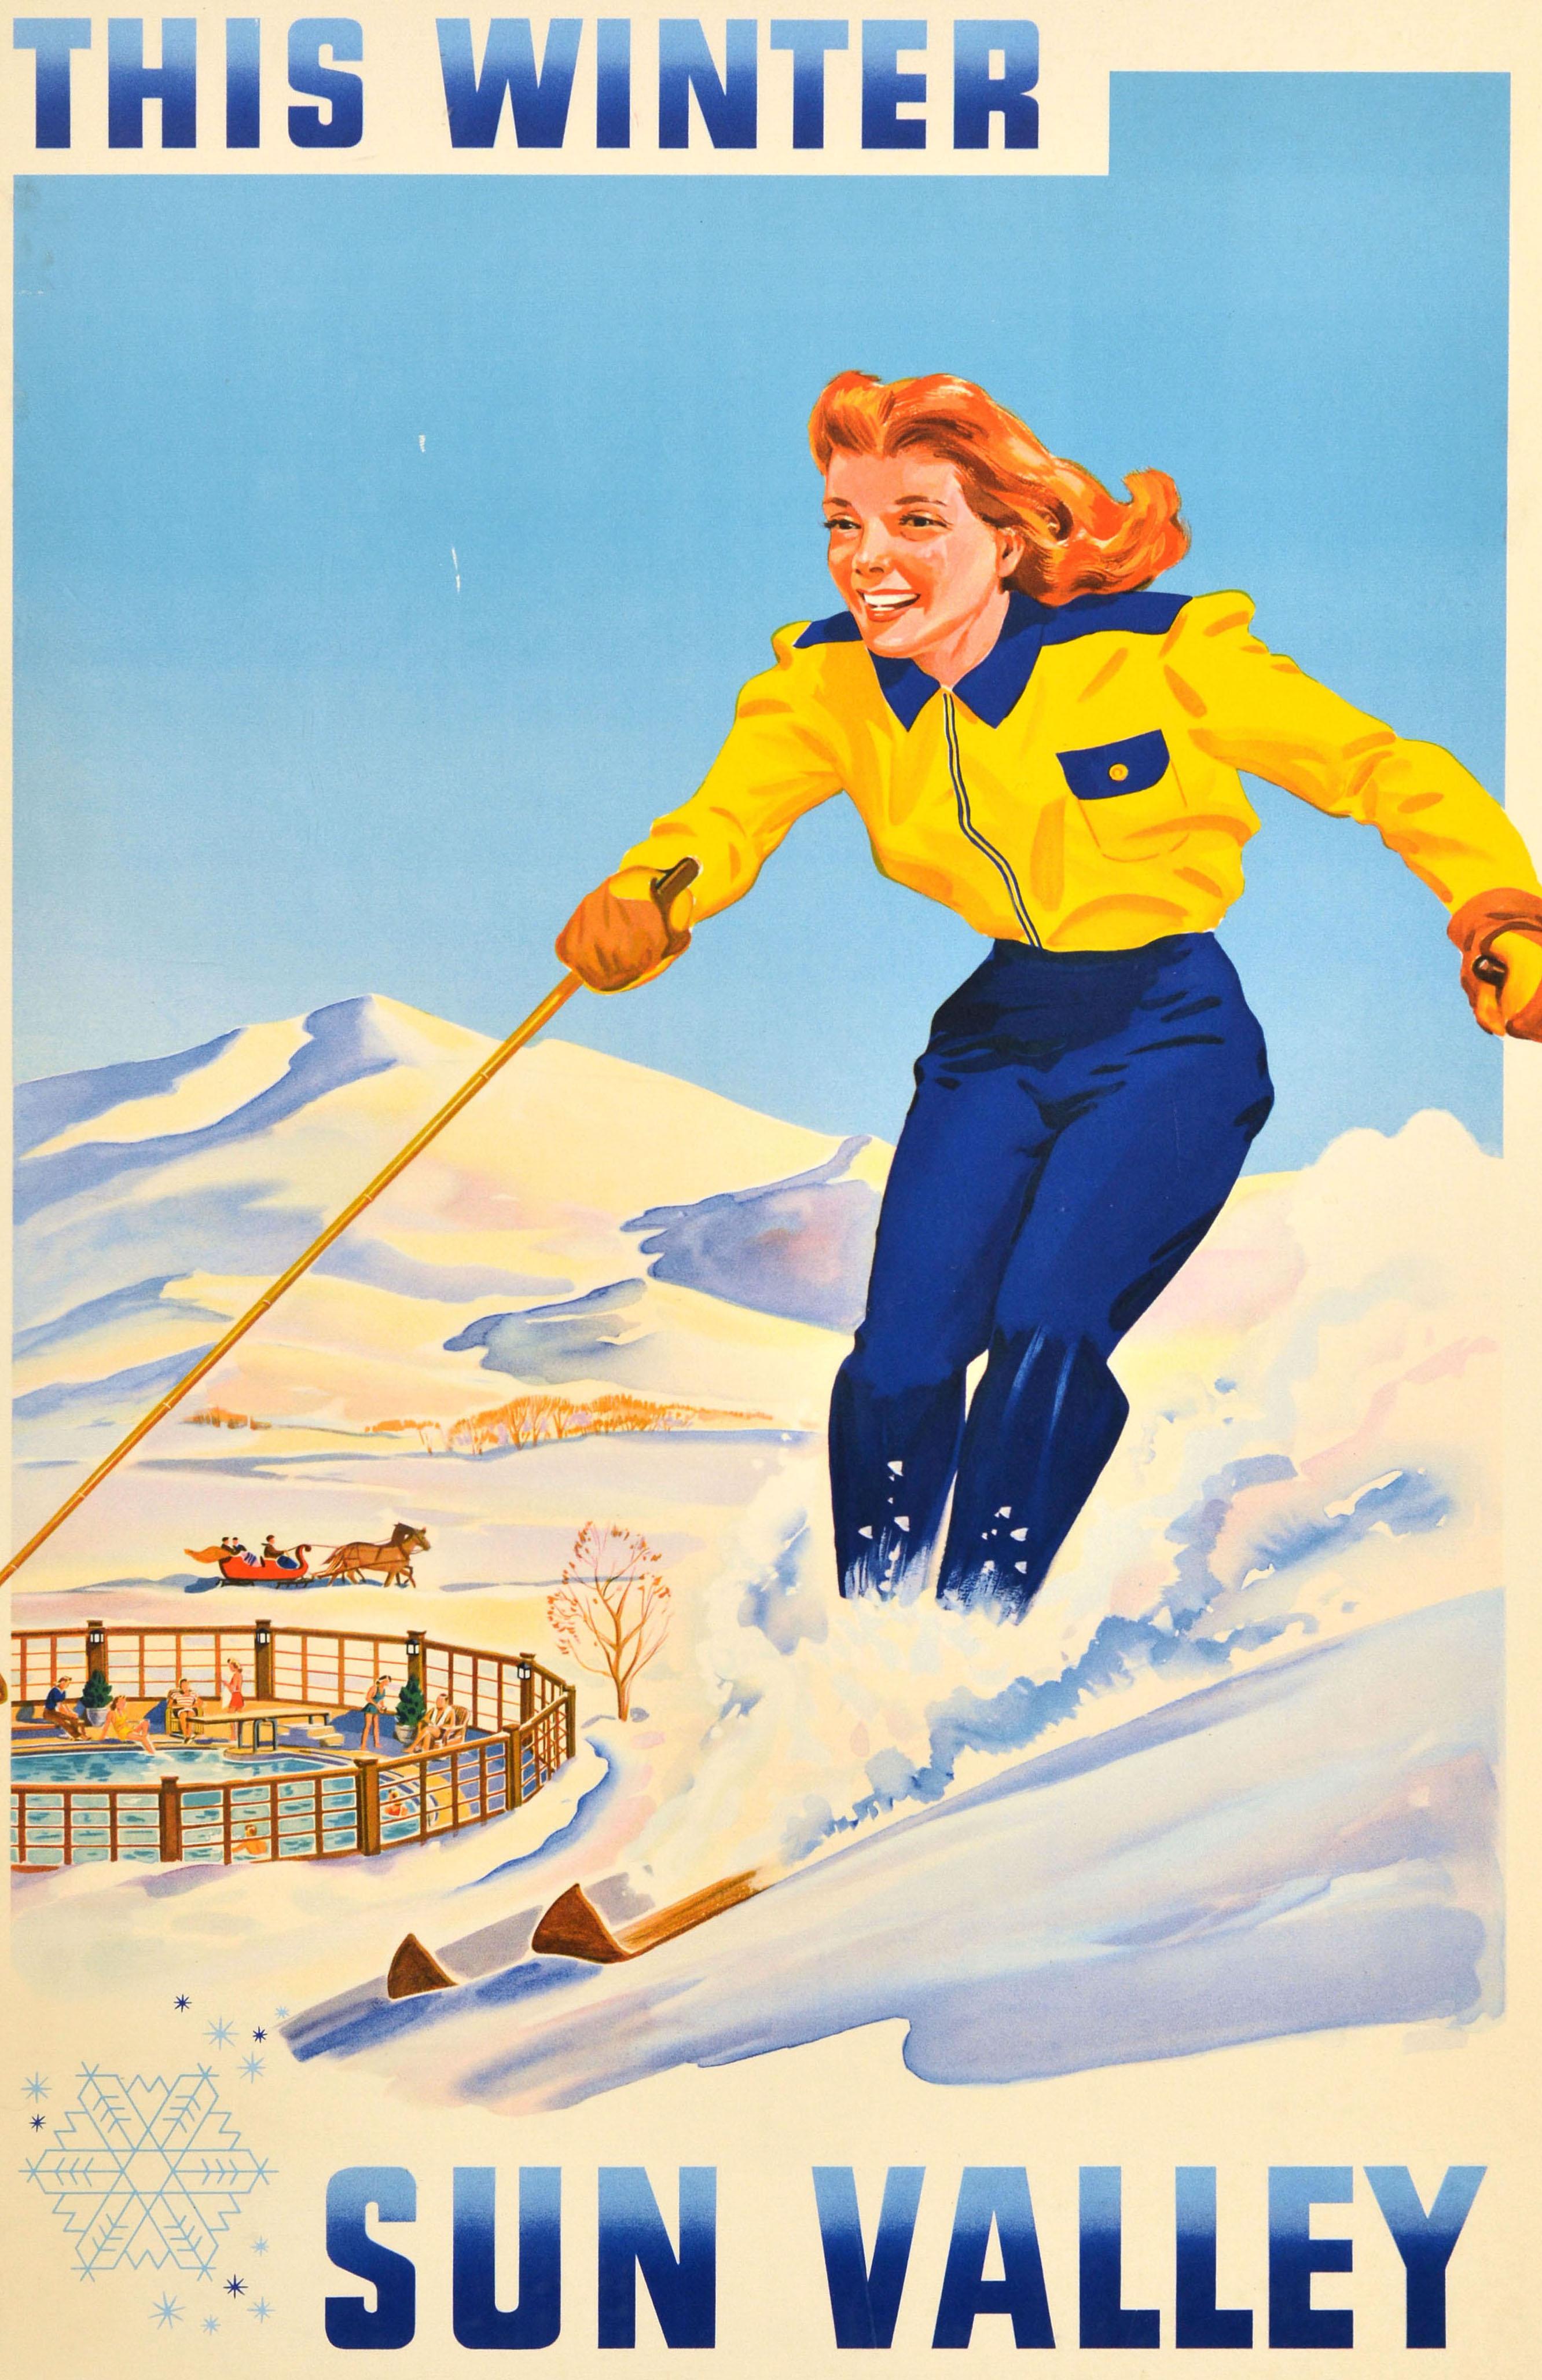 Original vintage winter sports travel poster - This Winter Sun Valley - featuring a great image of a smiling lady in a yellow and blue ski suit skiing down a snowy slope at speed with people enjoying swimming in an outdoor heated pool and riding a